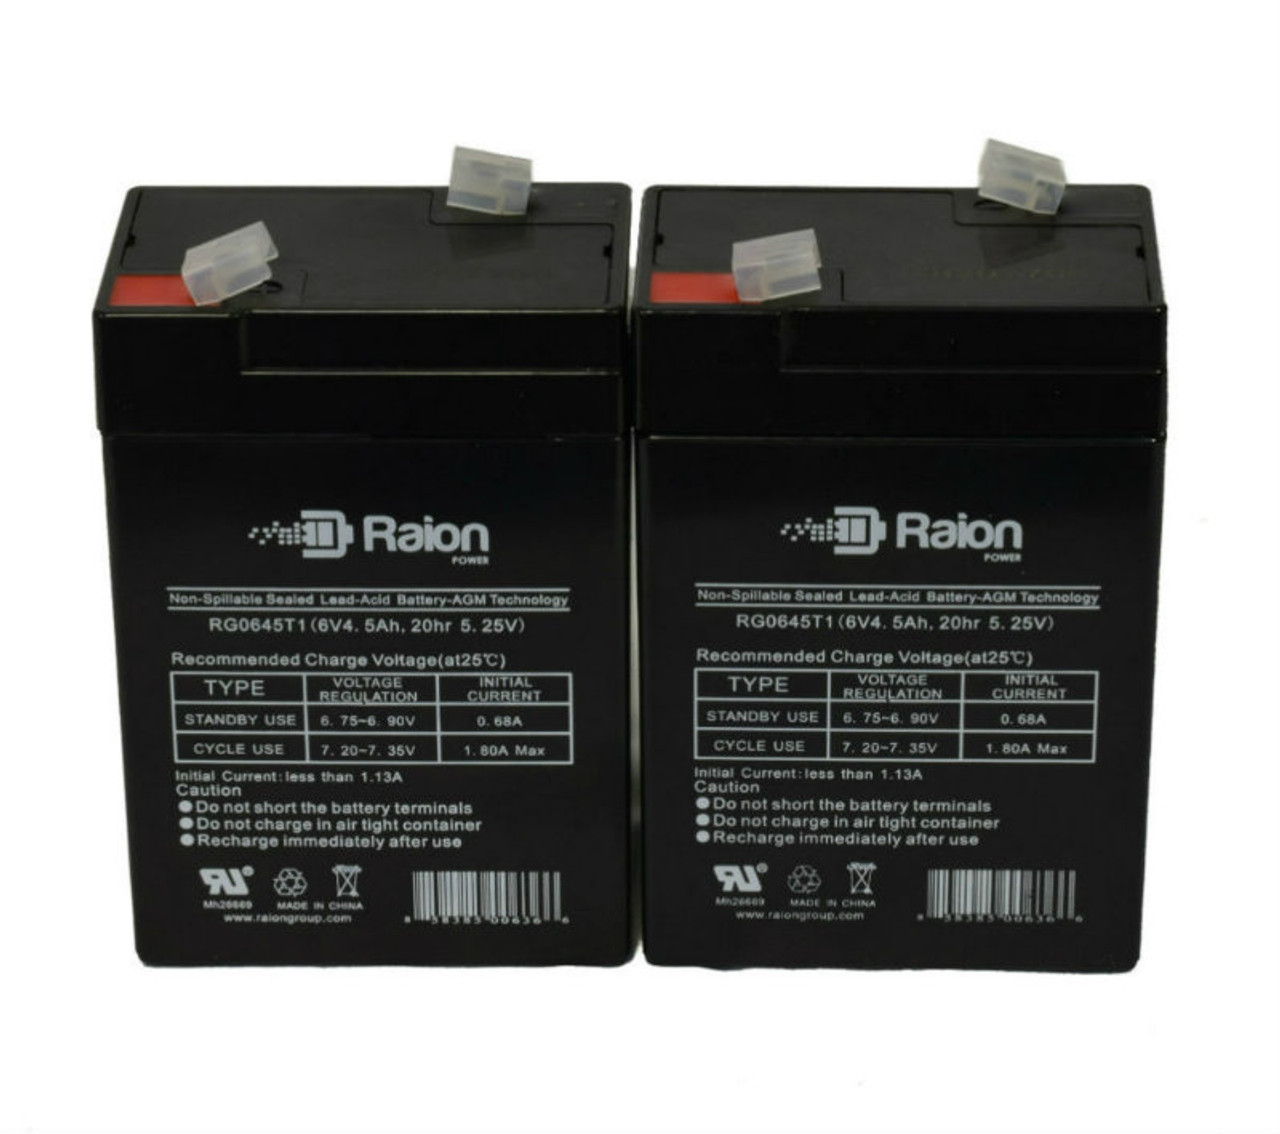 Raion Power 6 Volt 4.5Ah RG0645T1 Replacement Battery for Weiboer GB6-6 - 2 Pack